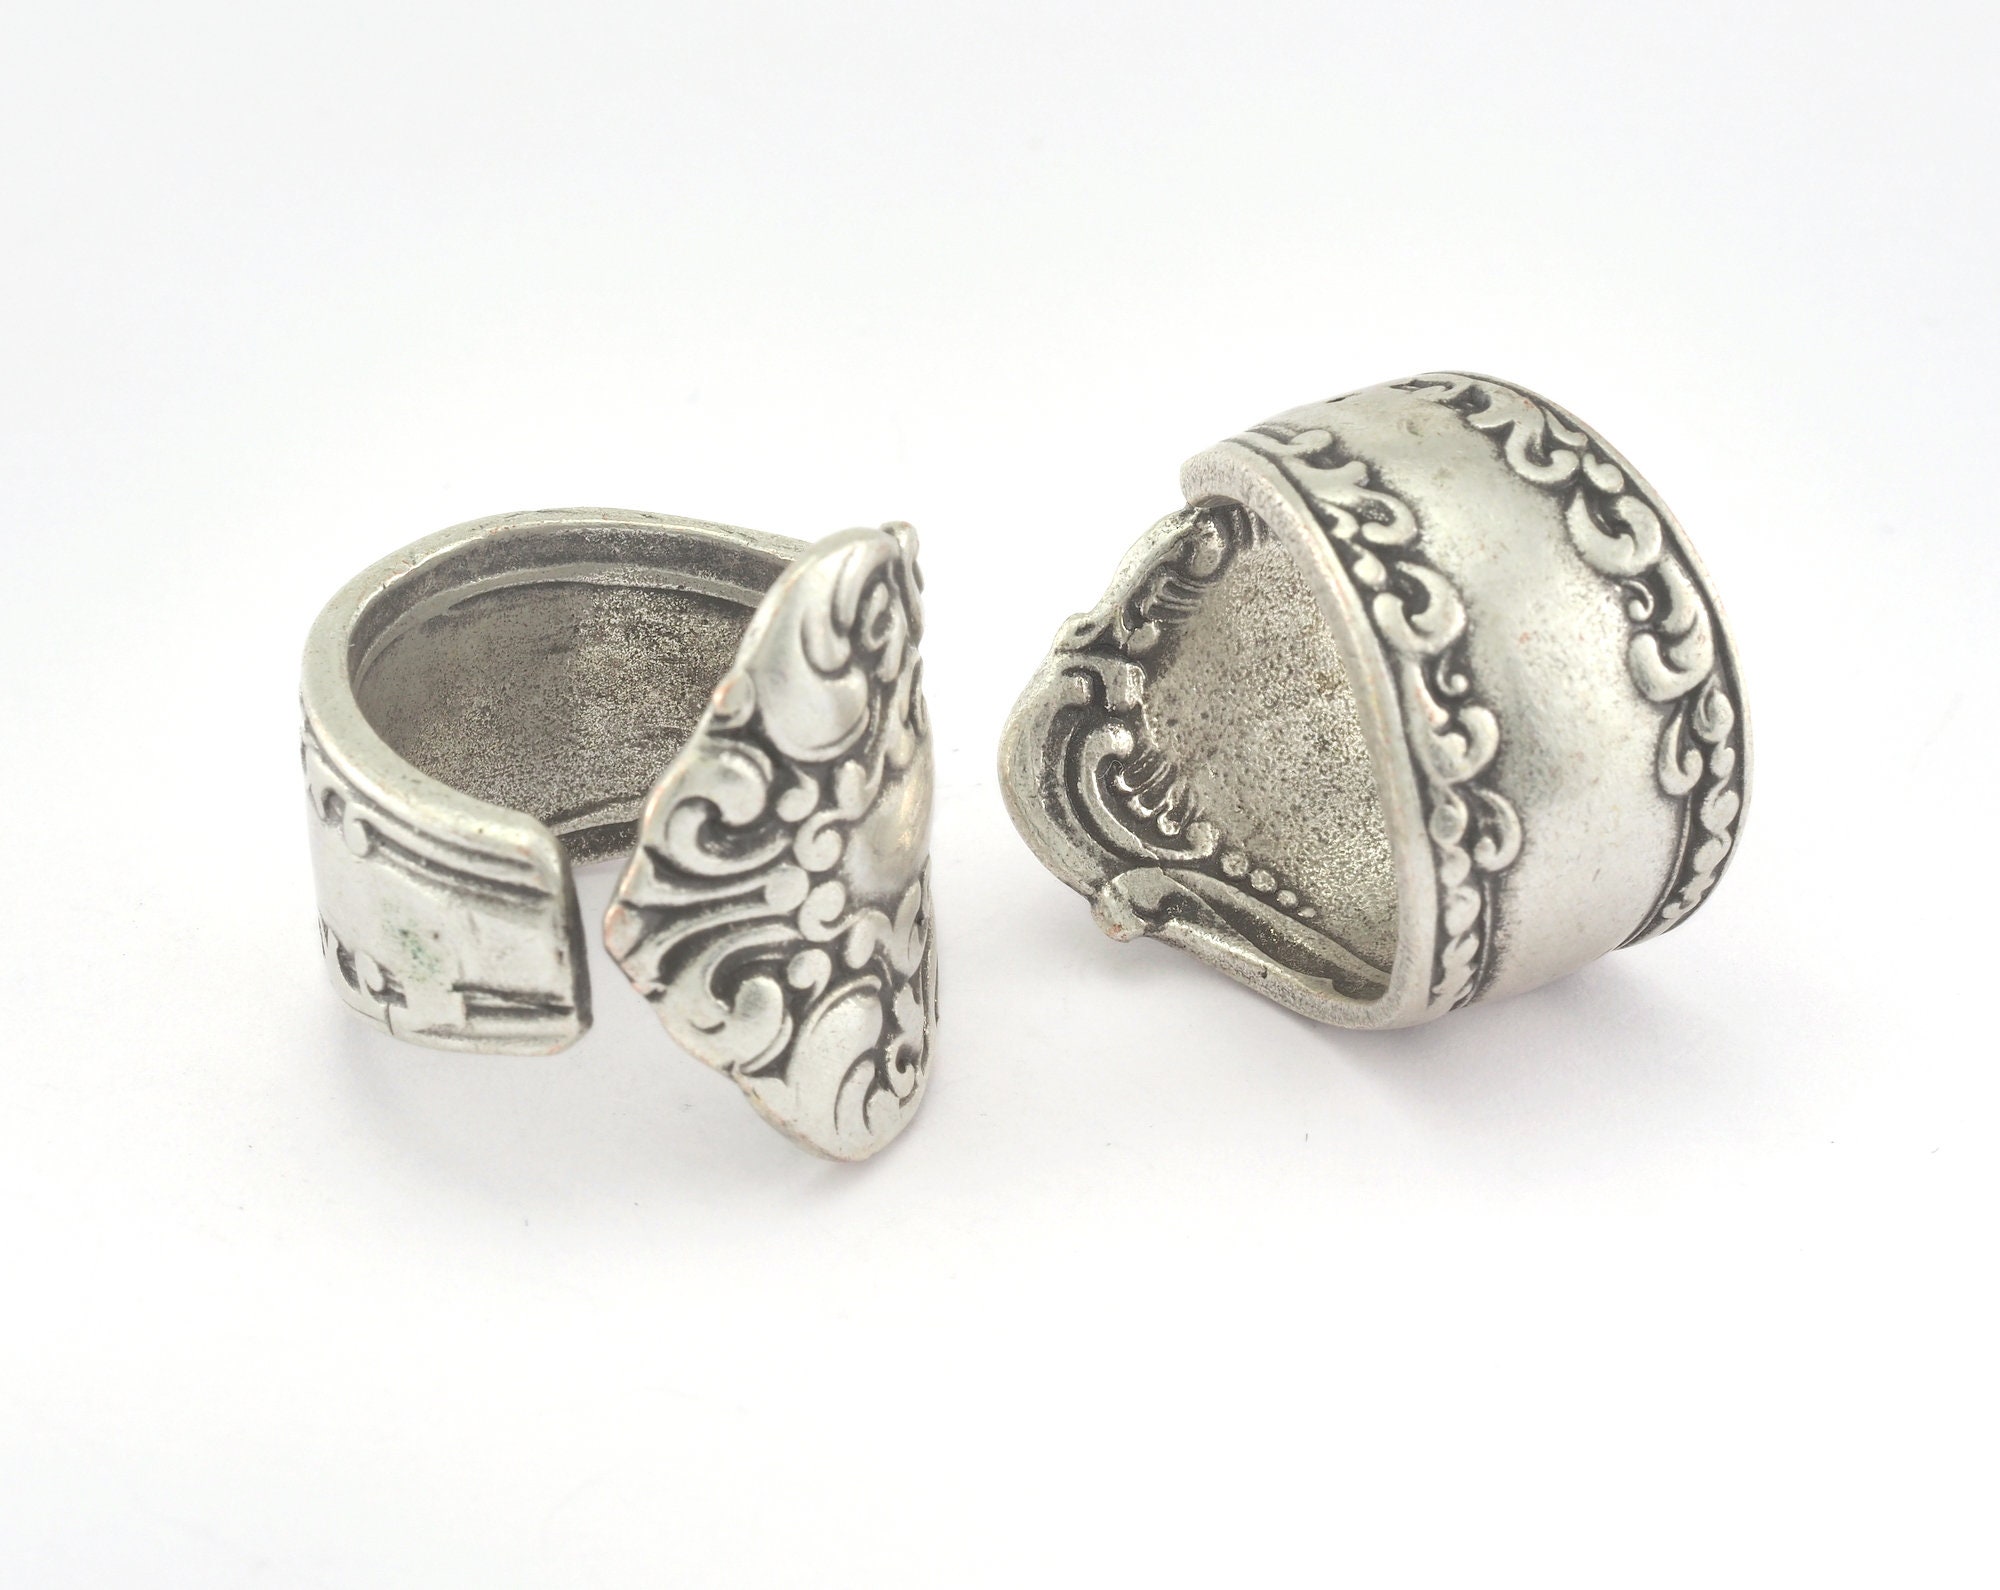 Spoon Ring Flower Patterned Adjustable Ring Antique Silver Plated Brass 2692